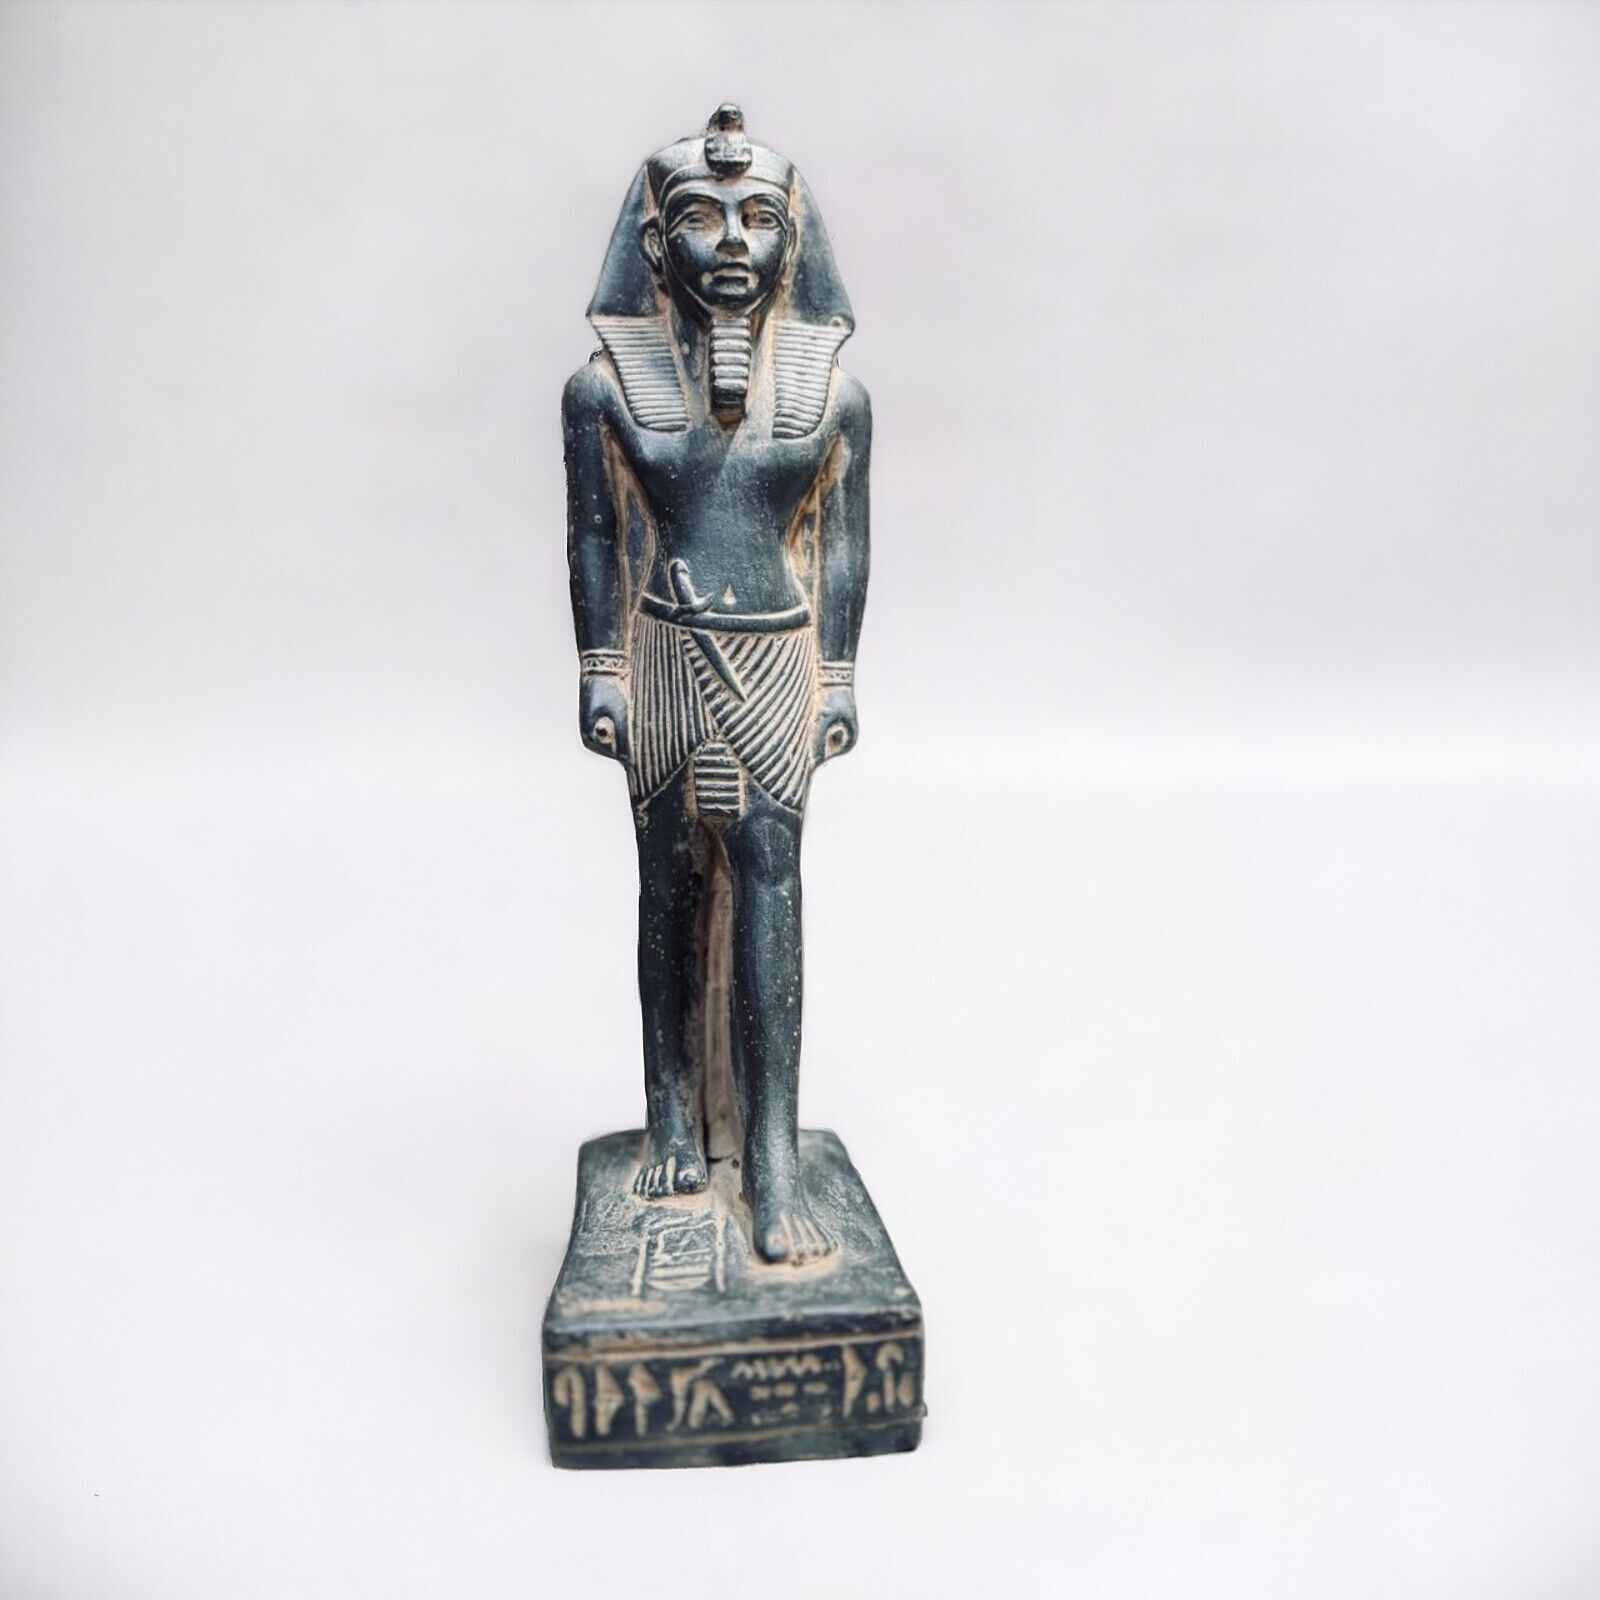 Rare Antiques Ancient Statue of Thutmose III Pharaonic Ruler of Egypt BC